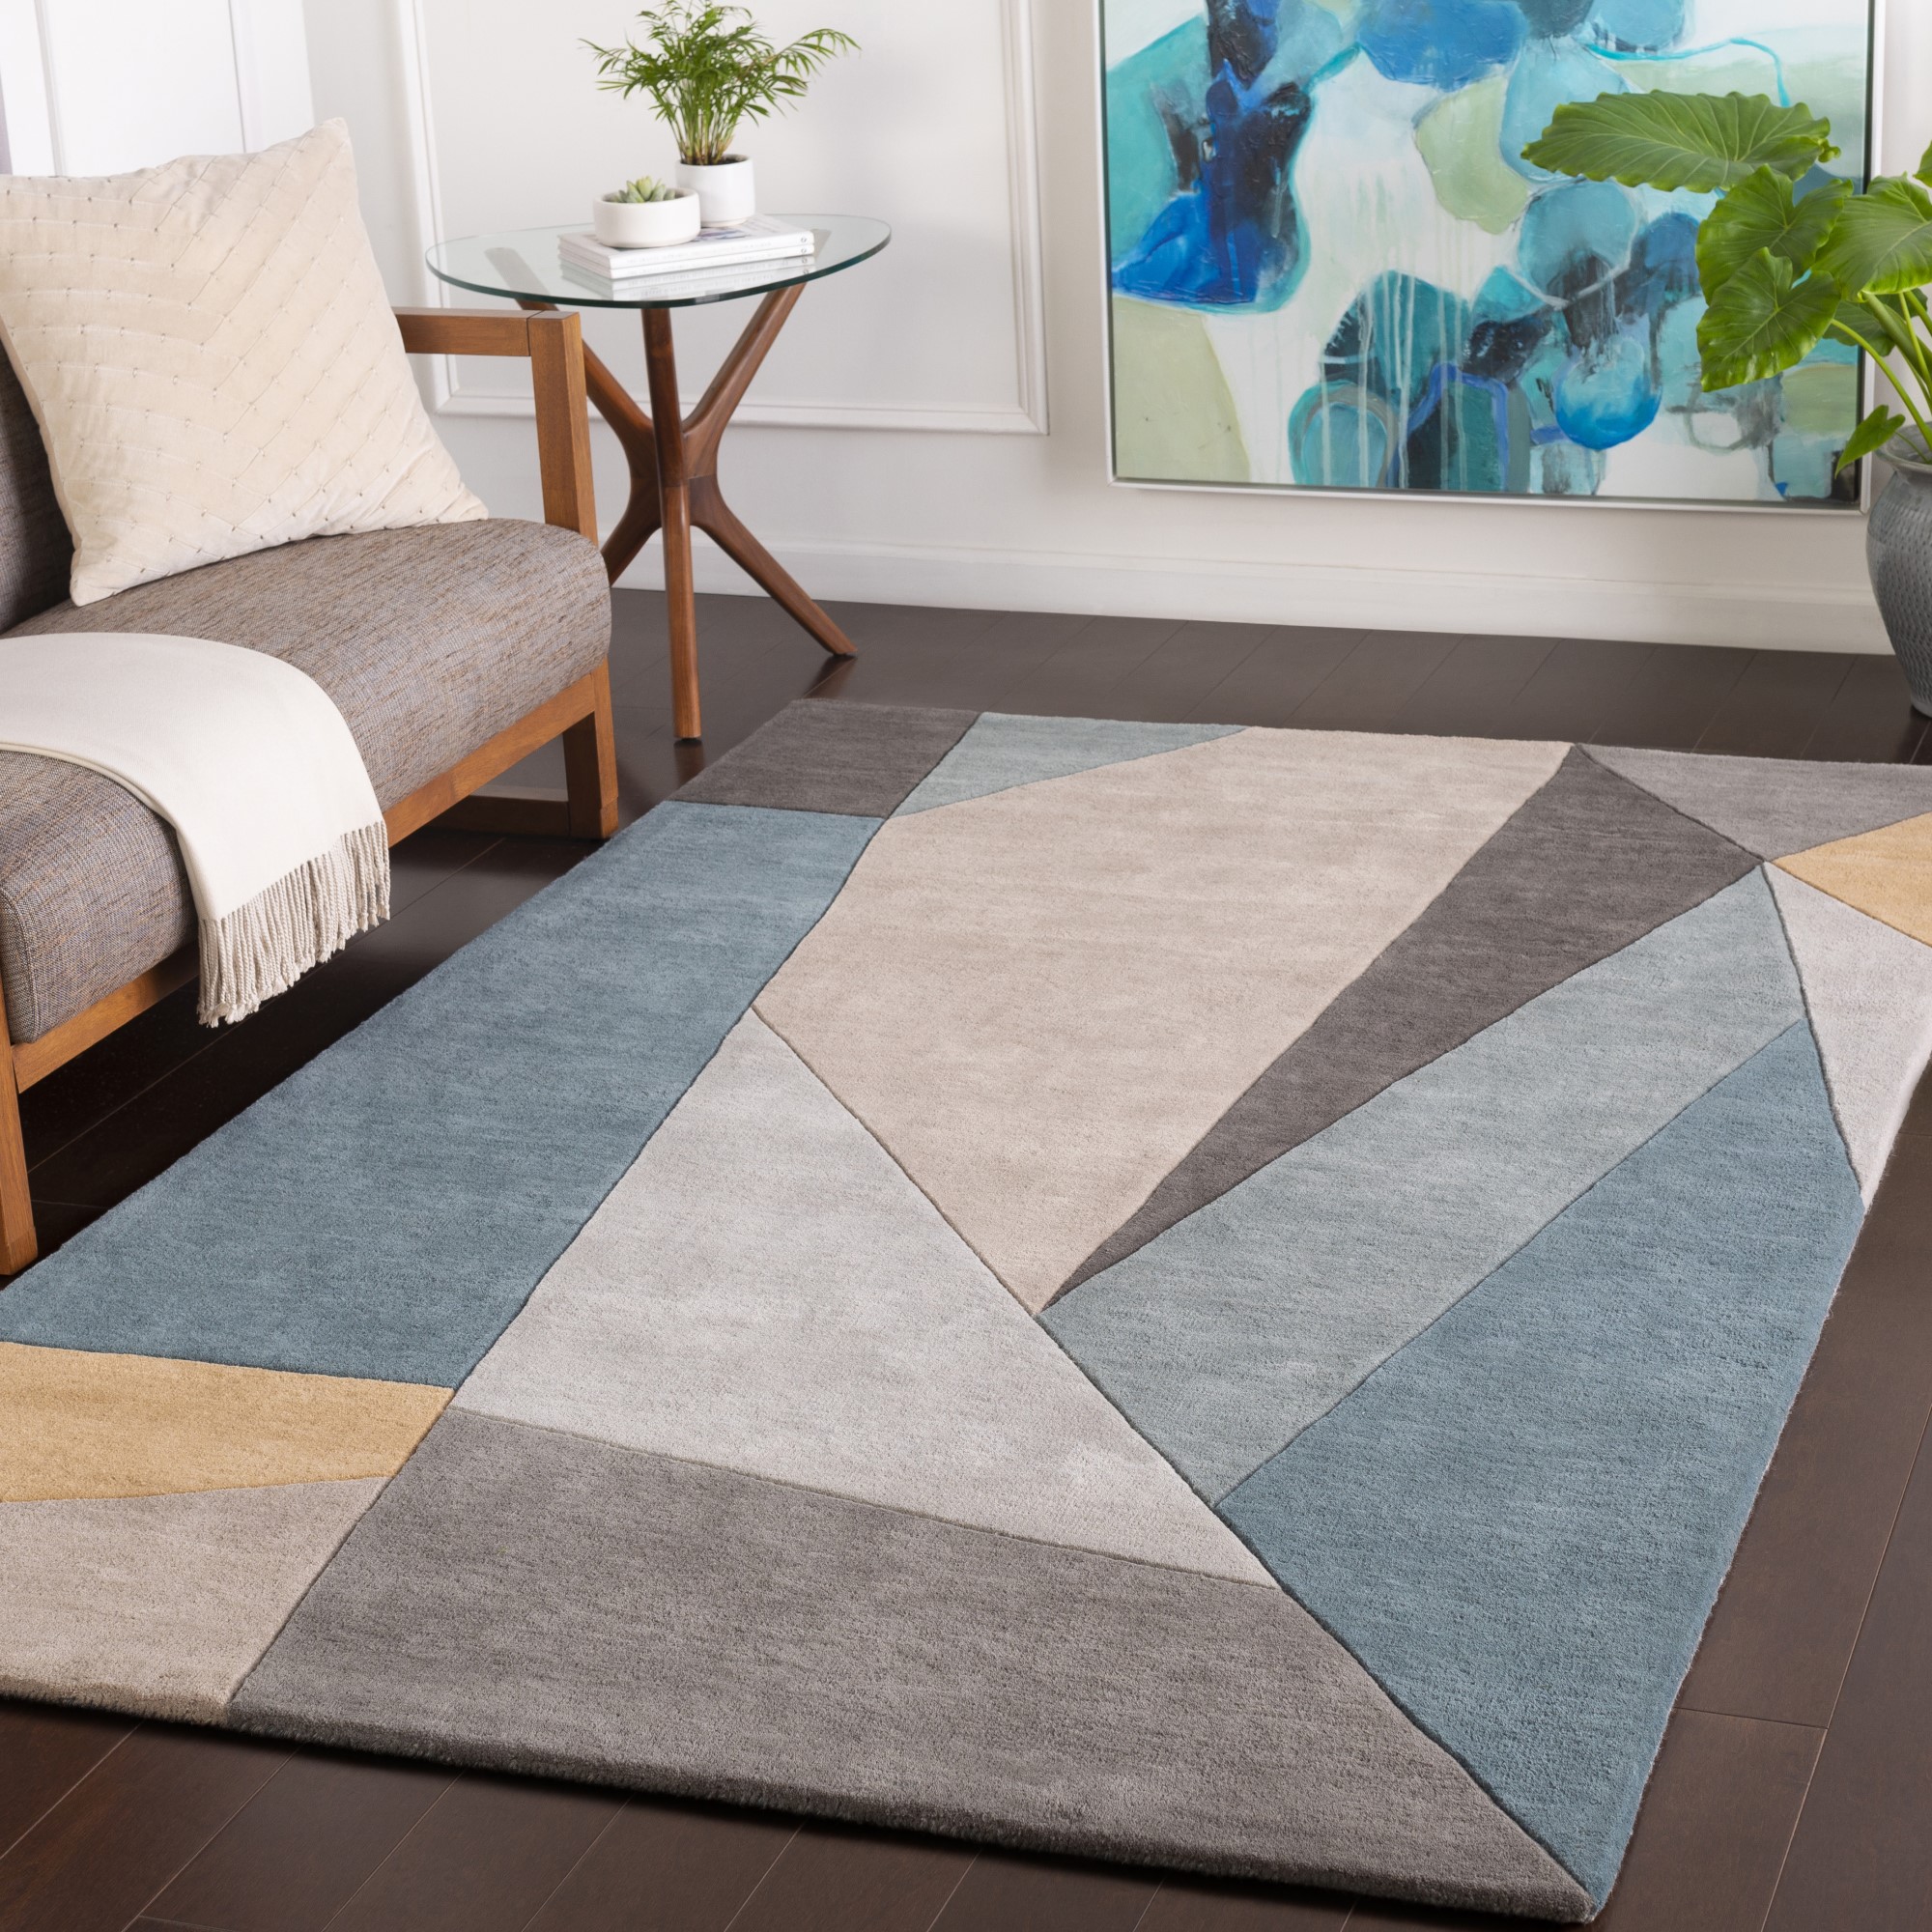 Surya Forum Fm 7223 Rugs Direct, Teal Blue And Brown Area Rugs